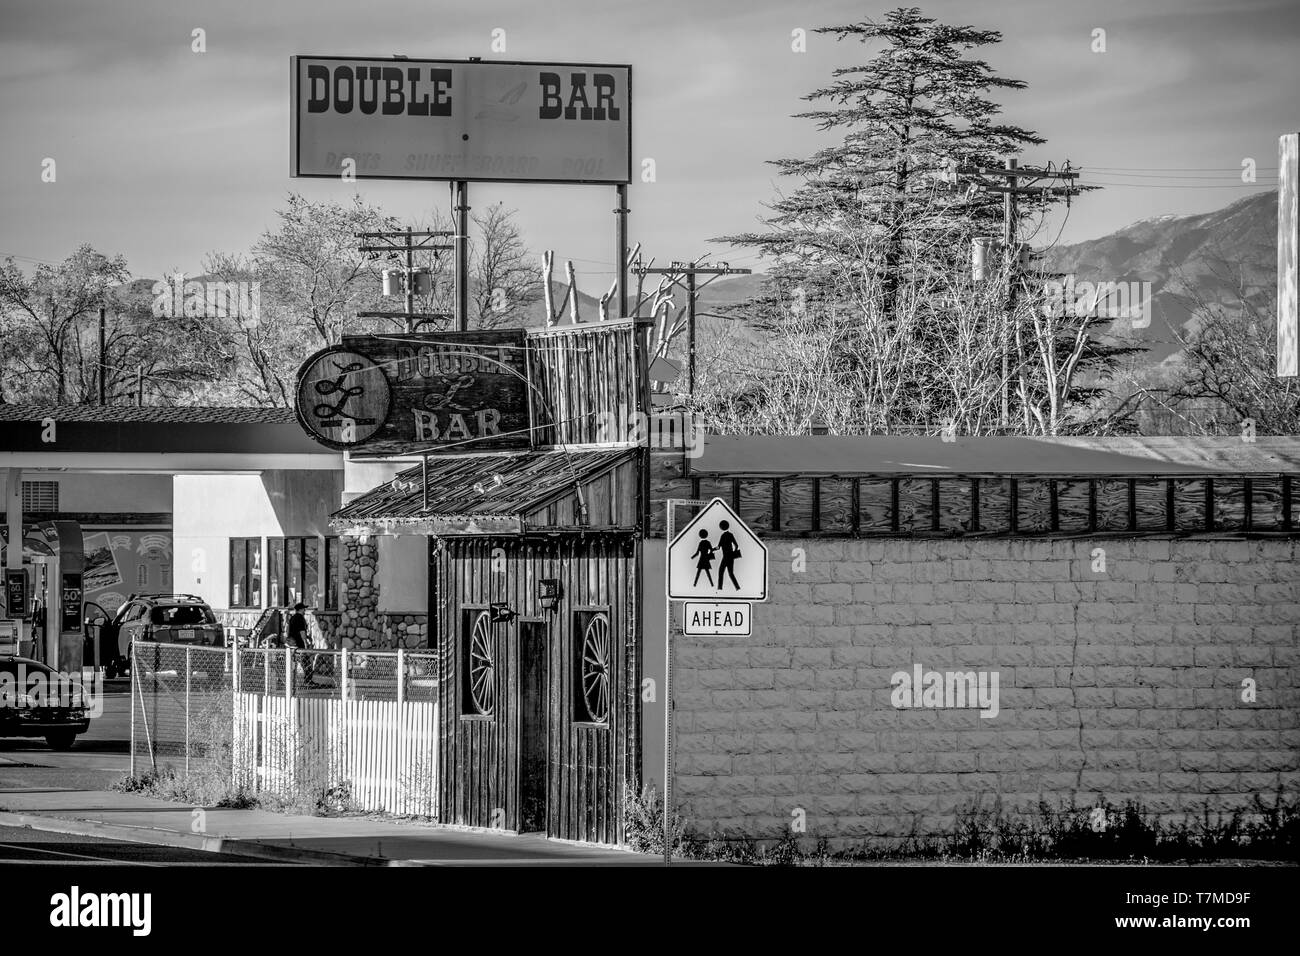 Double bar in the historic village of Lone Pine - LONE PINE CA, UNITED STATES OF AMERICA - MARCH 29, 2019 Stock Photo